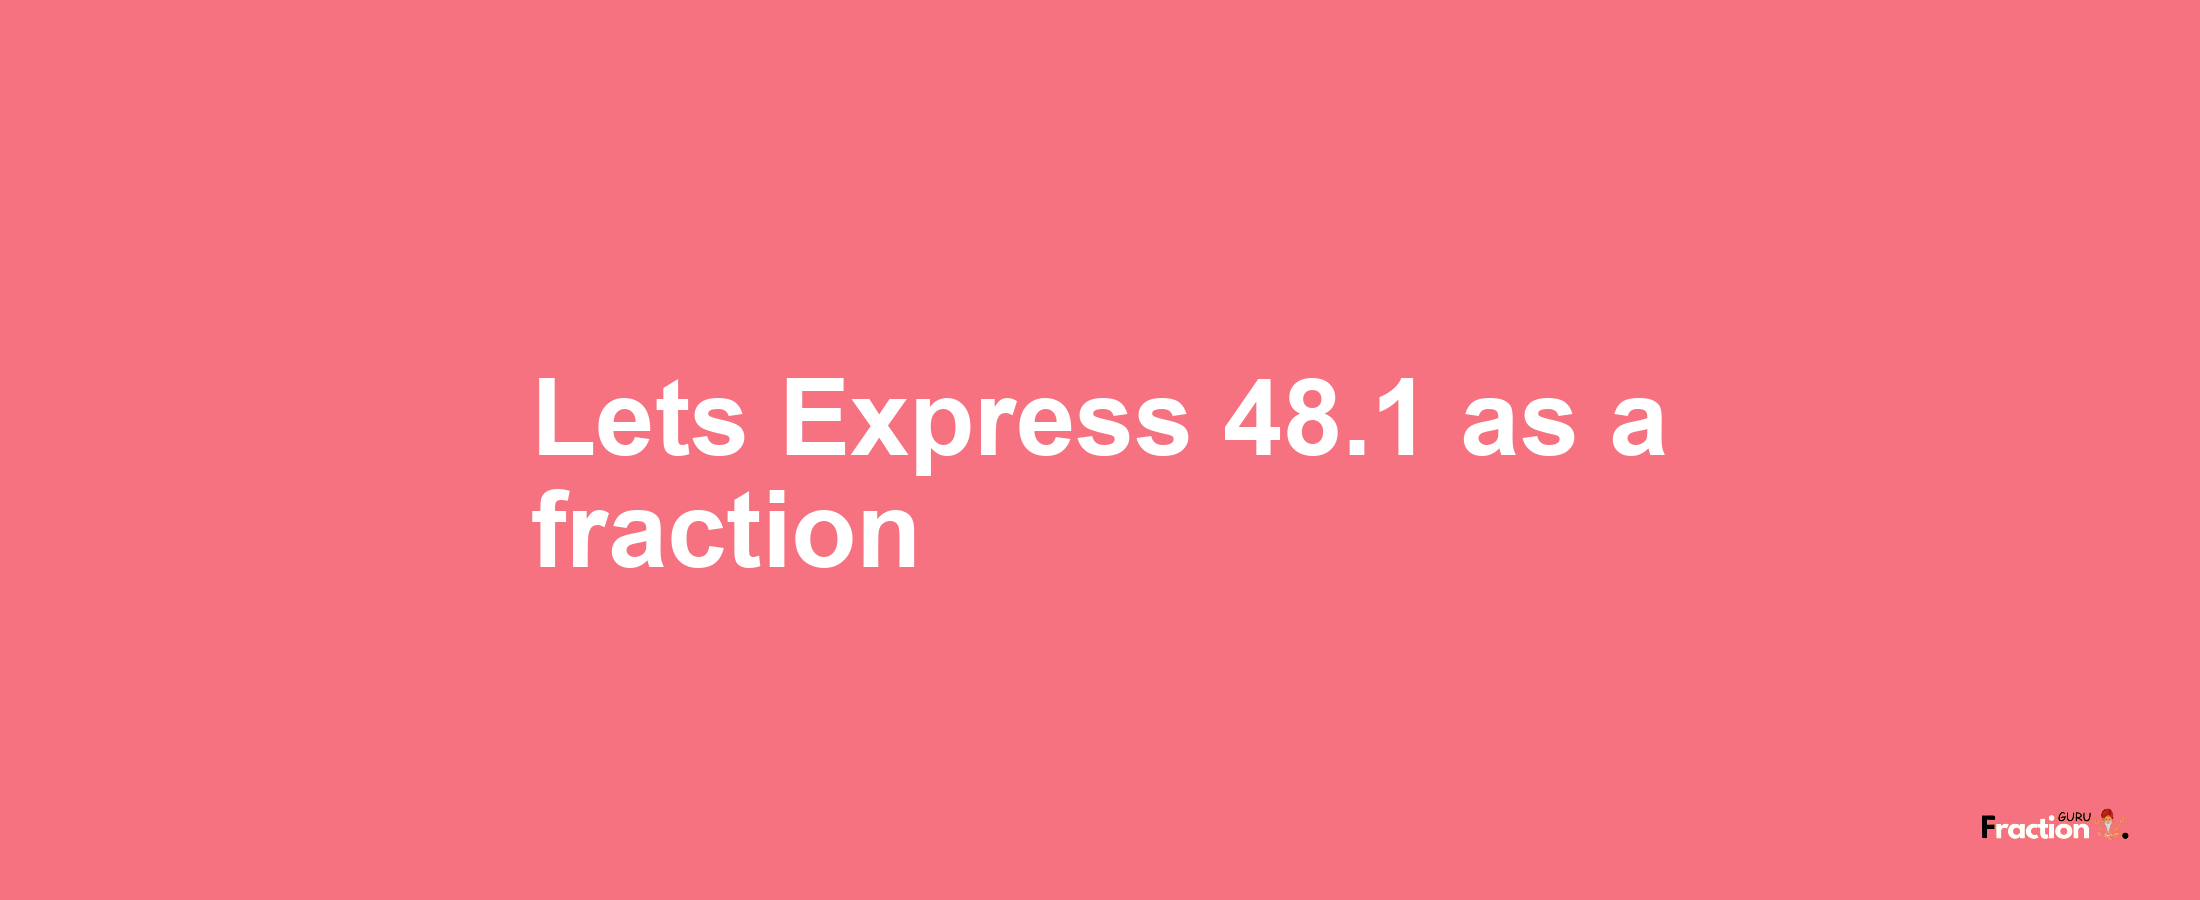 Lets Express 48.1 as afraction